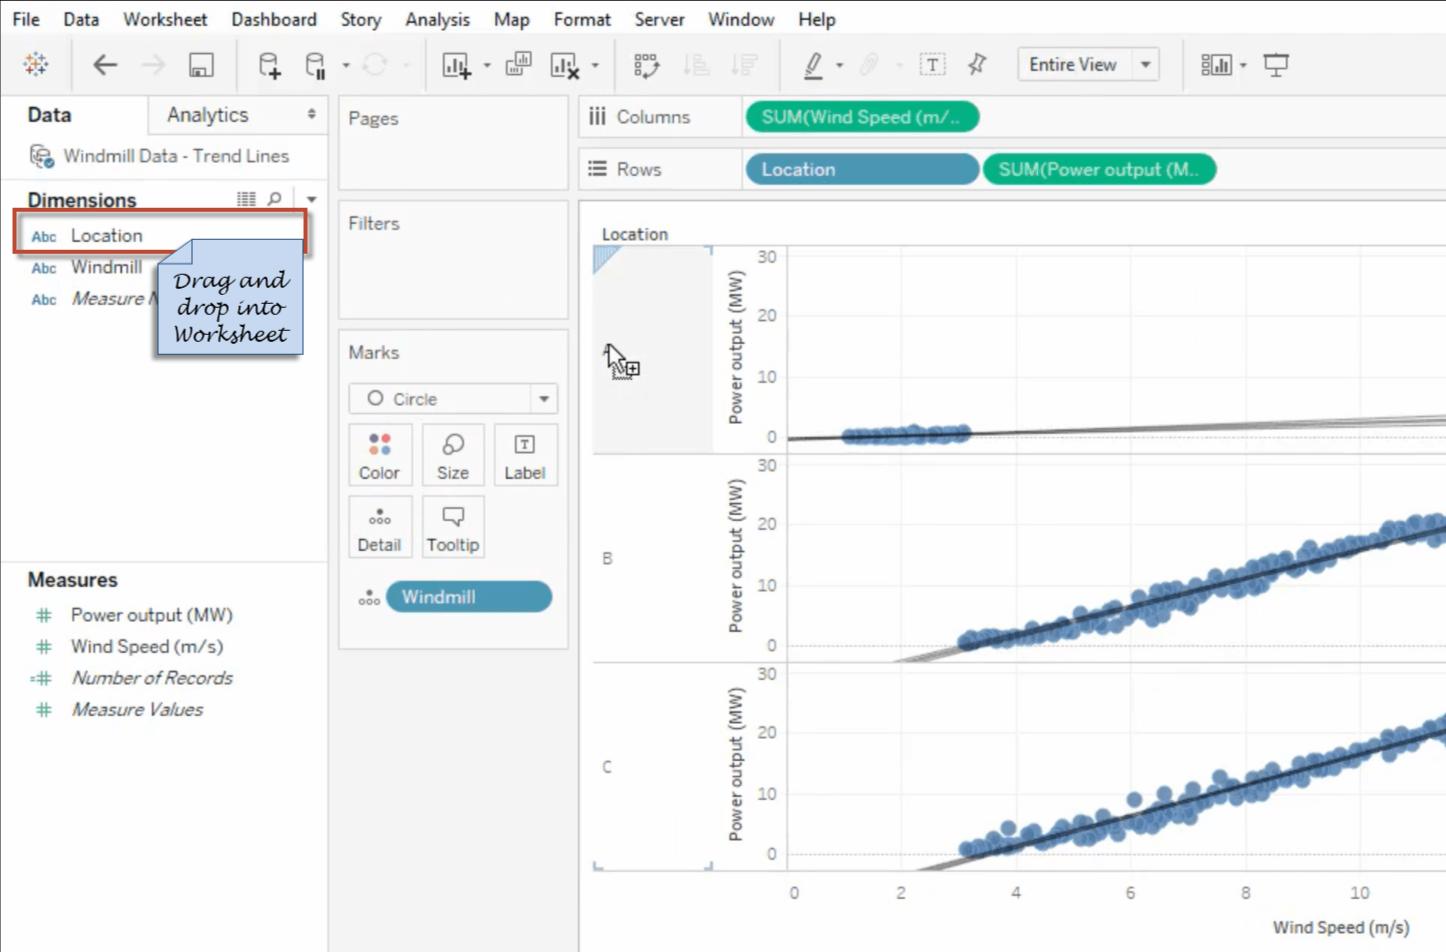 How to Add the Trend Lines in Tableau?